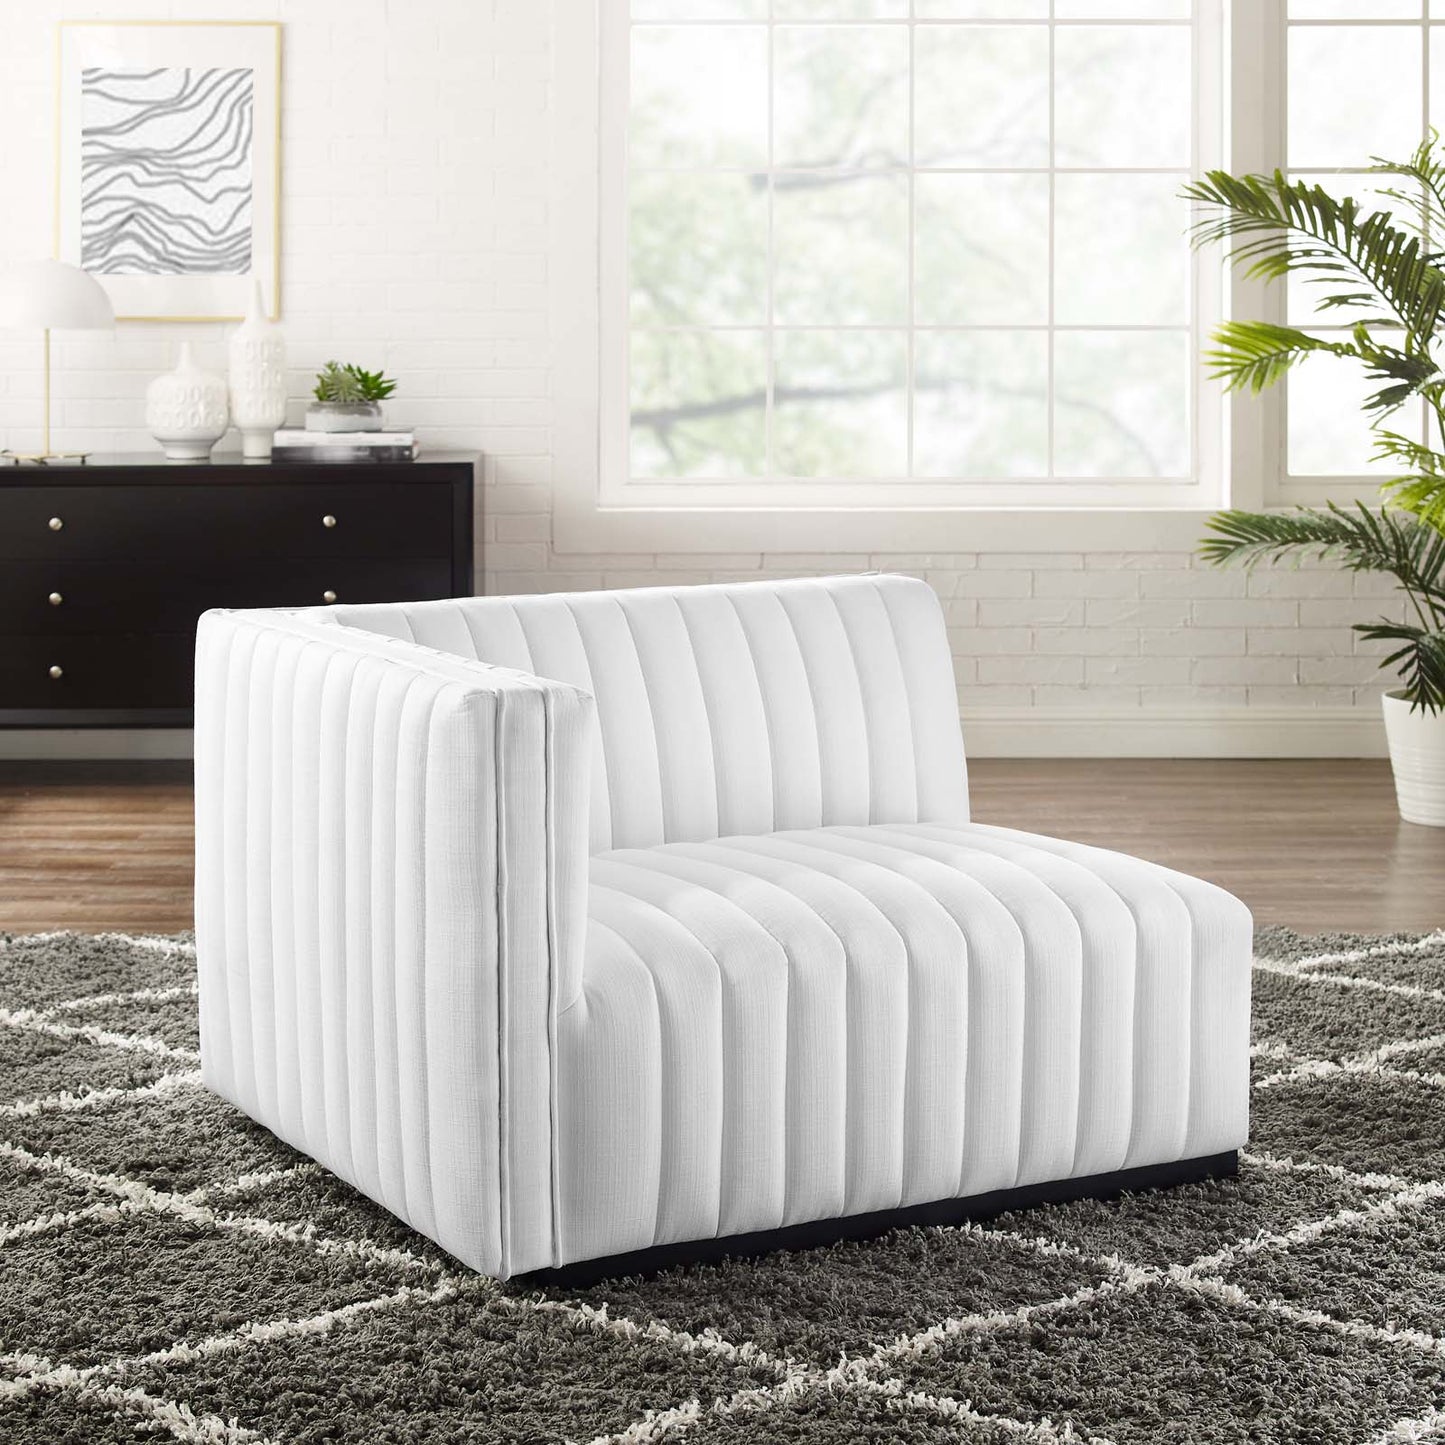 Conjure Channel Tufted Upholstered Fabric Left-Arm Chair Black White EEI-5491-BLK-WHI